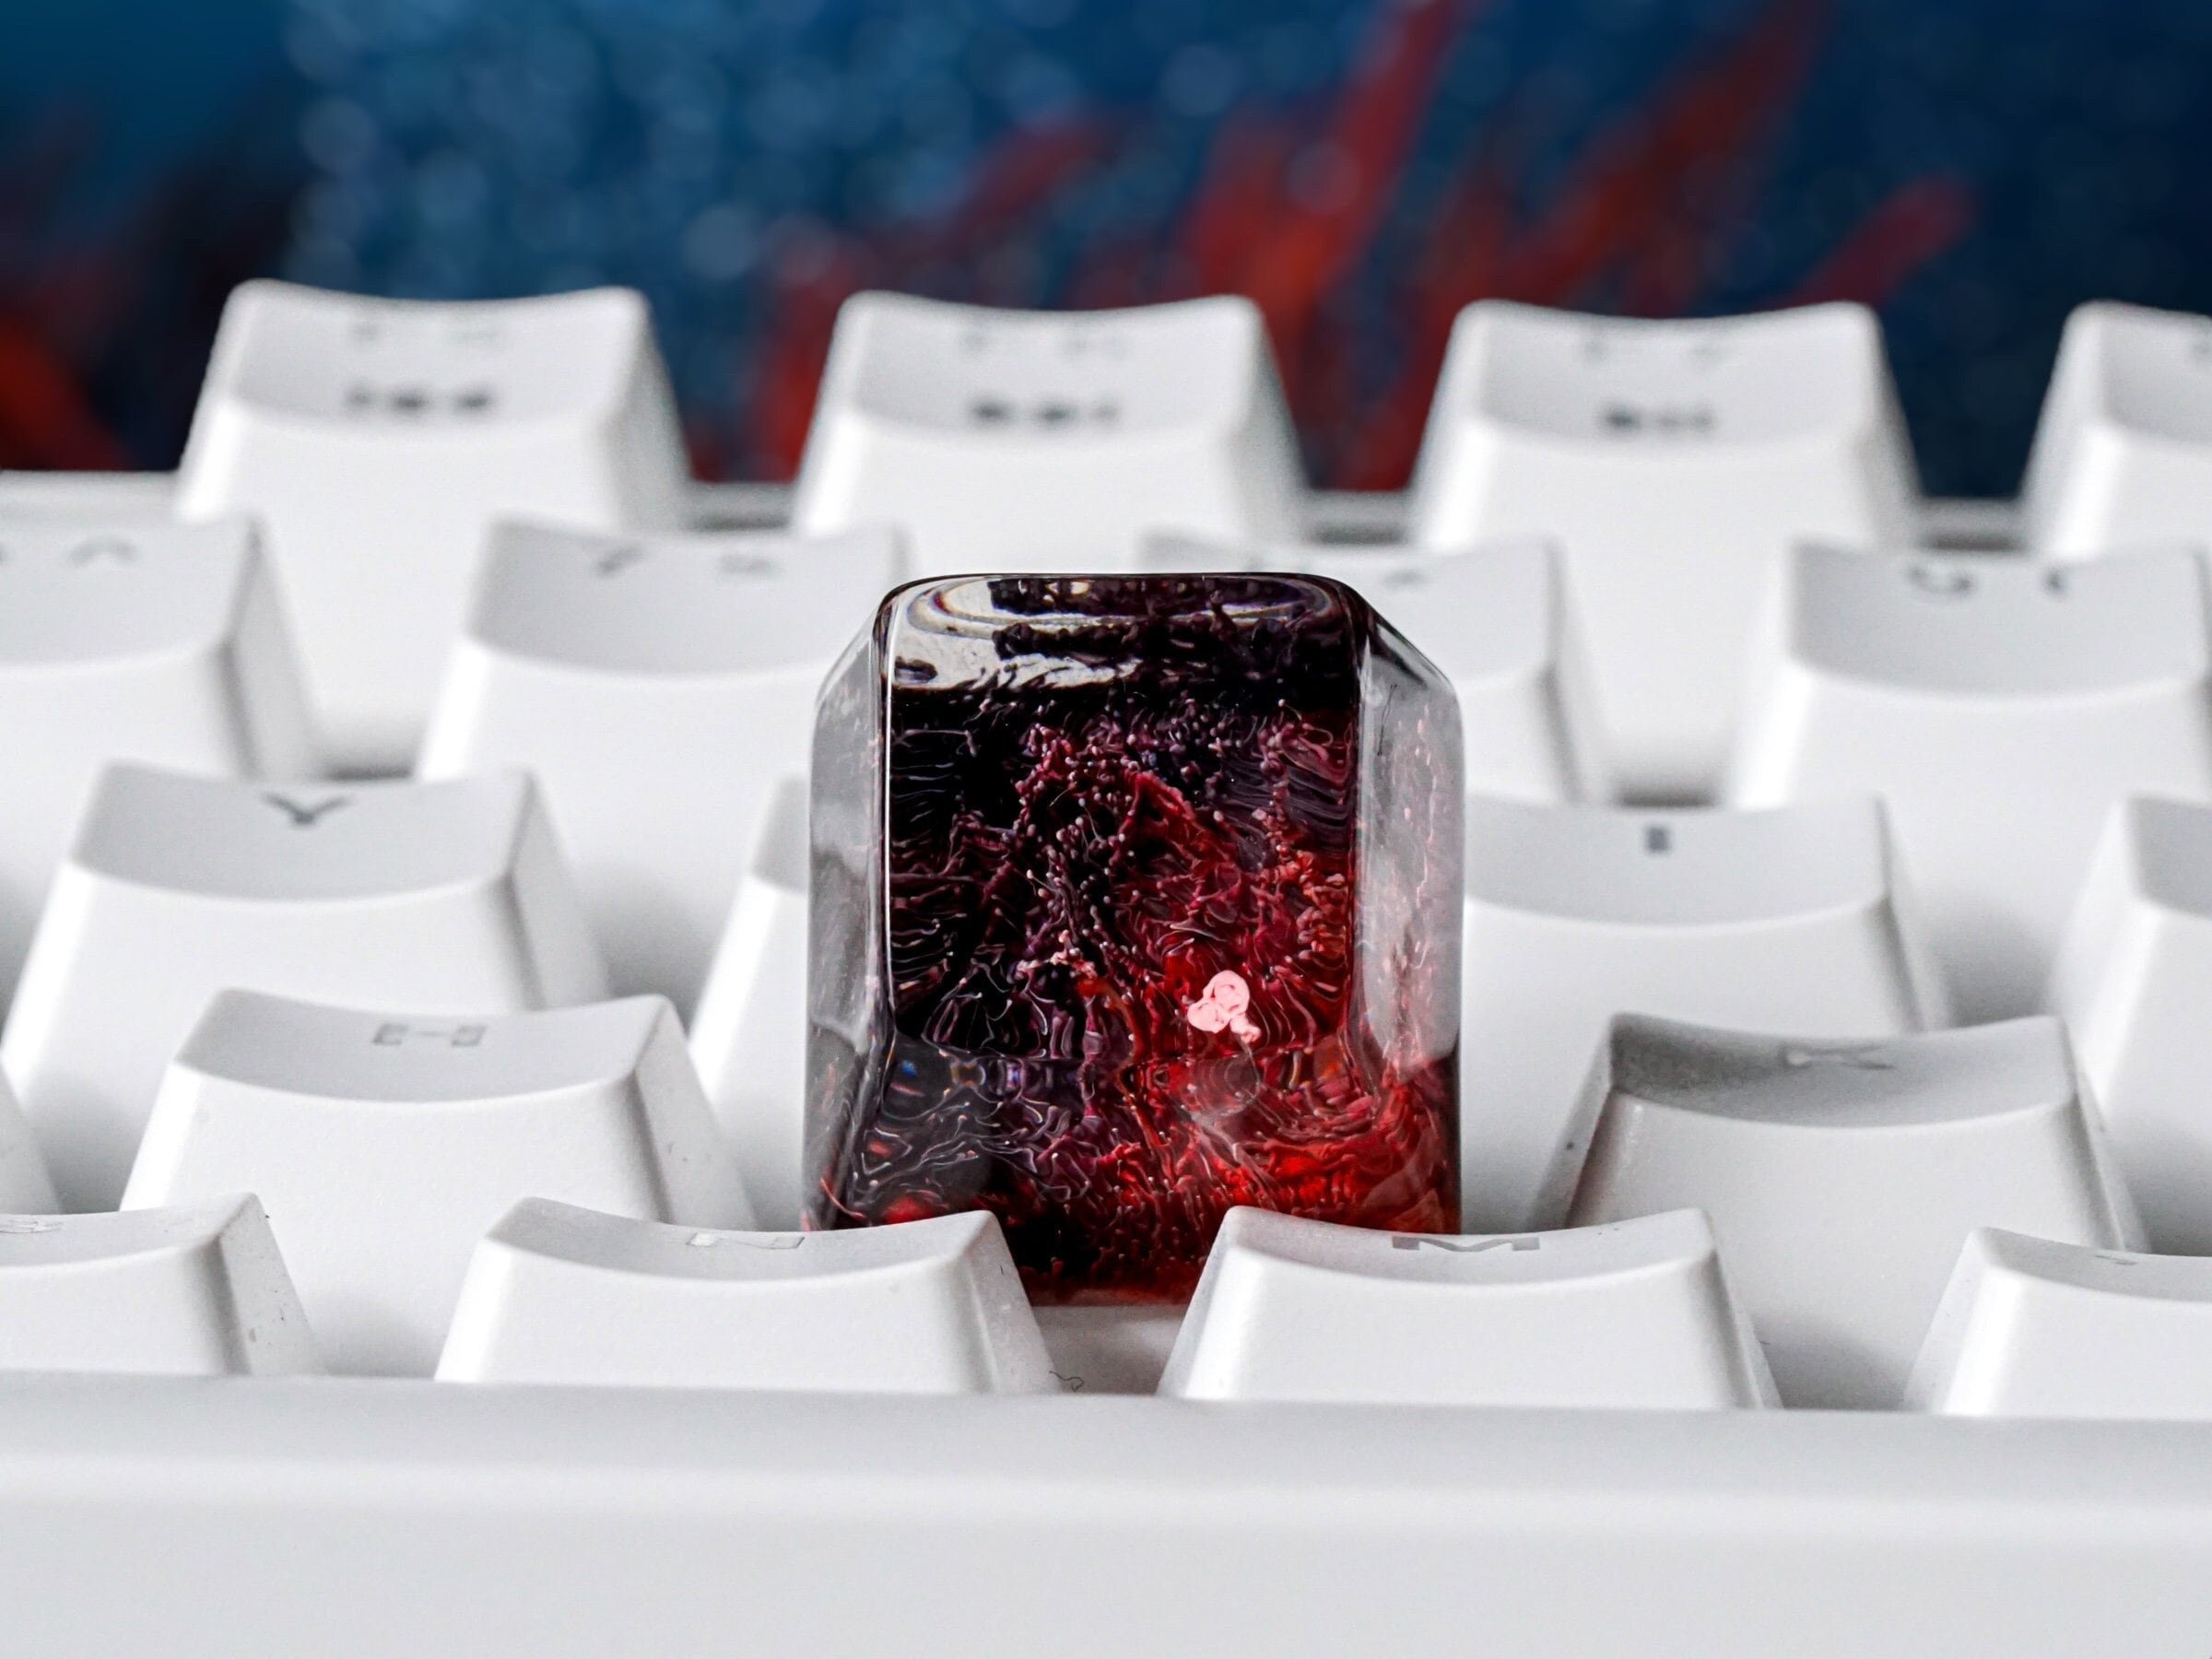 Red and Black Coral Keycap, Ocean Keycap, Artisan Keycap, Keycap for MX Cherry Switches Keyboard, Handmade Gift